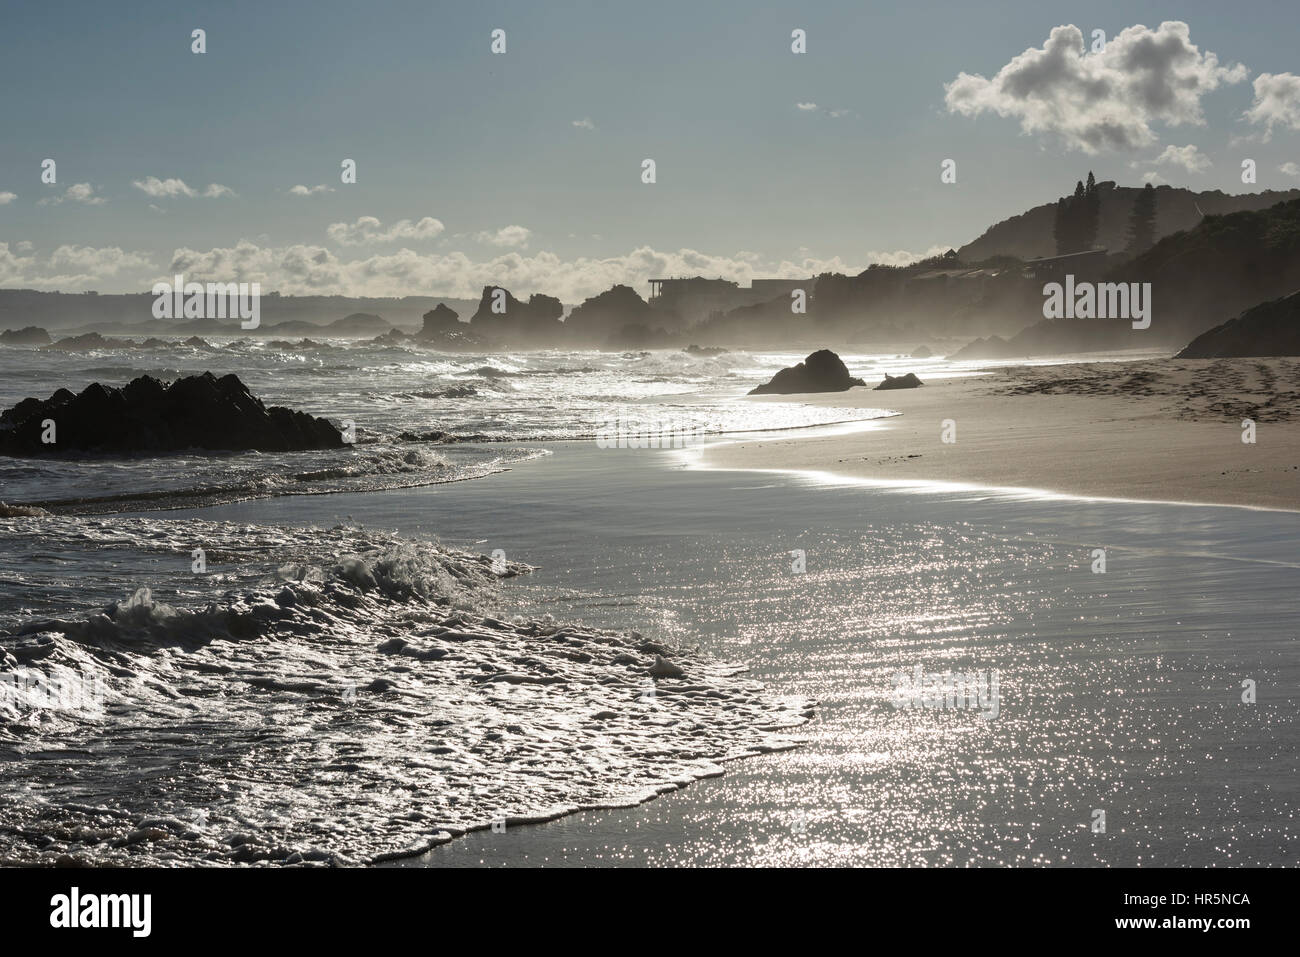 The Beach at Keurboomstrand in Late Afternoon light, Western Cape, South Africa Stock Photo